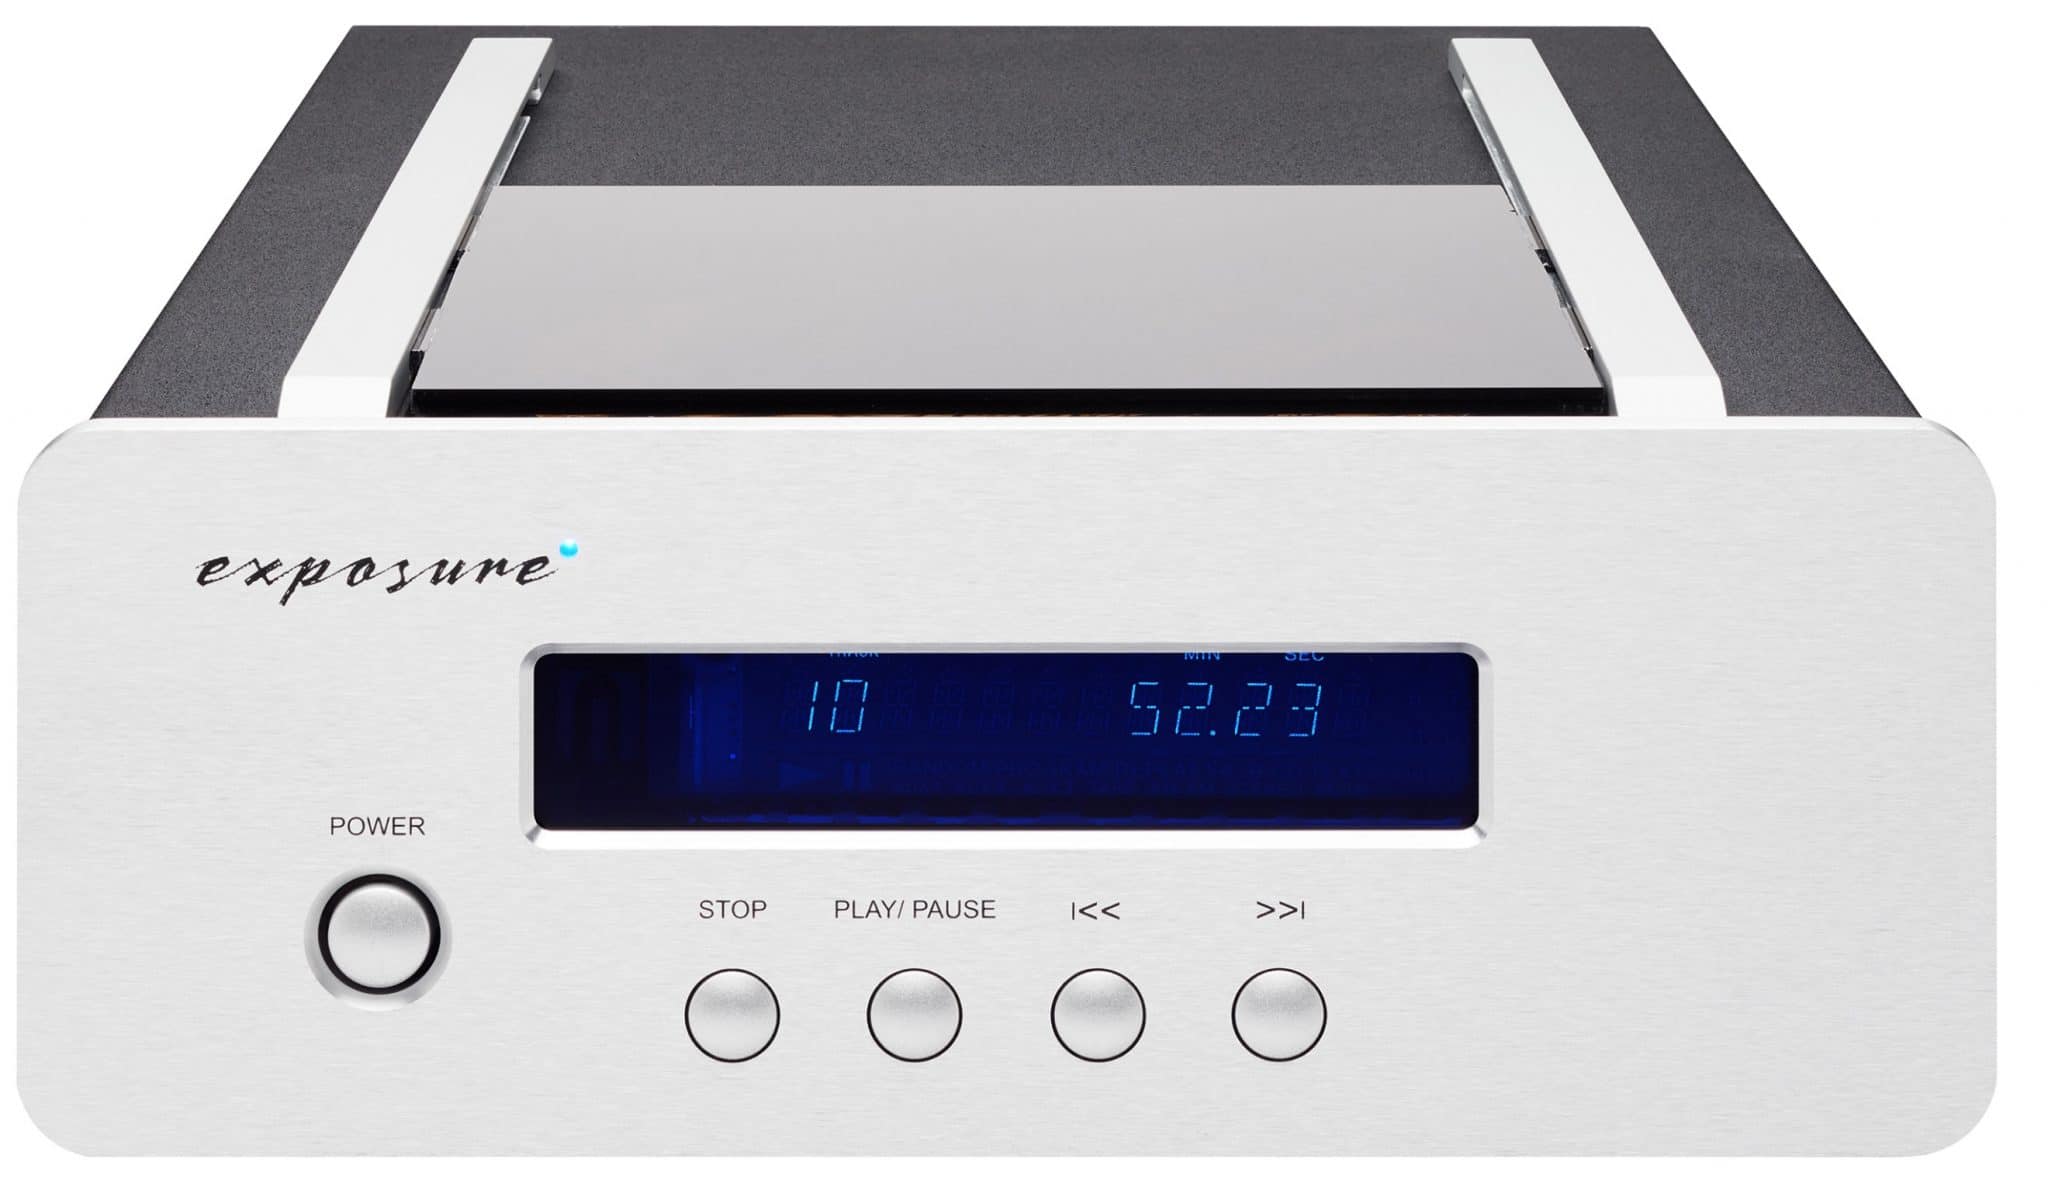 XM CD player From Exposure